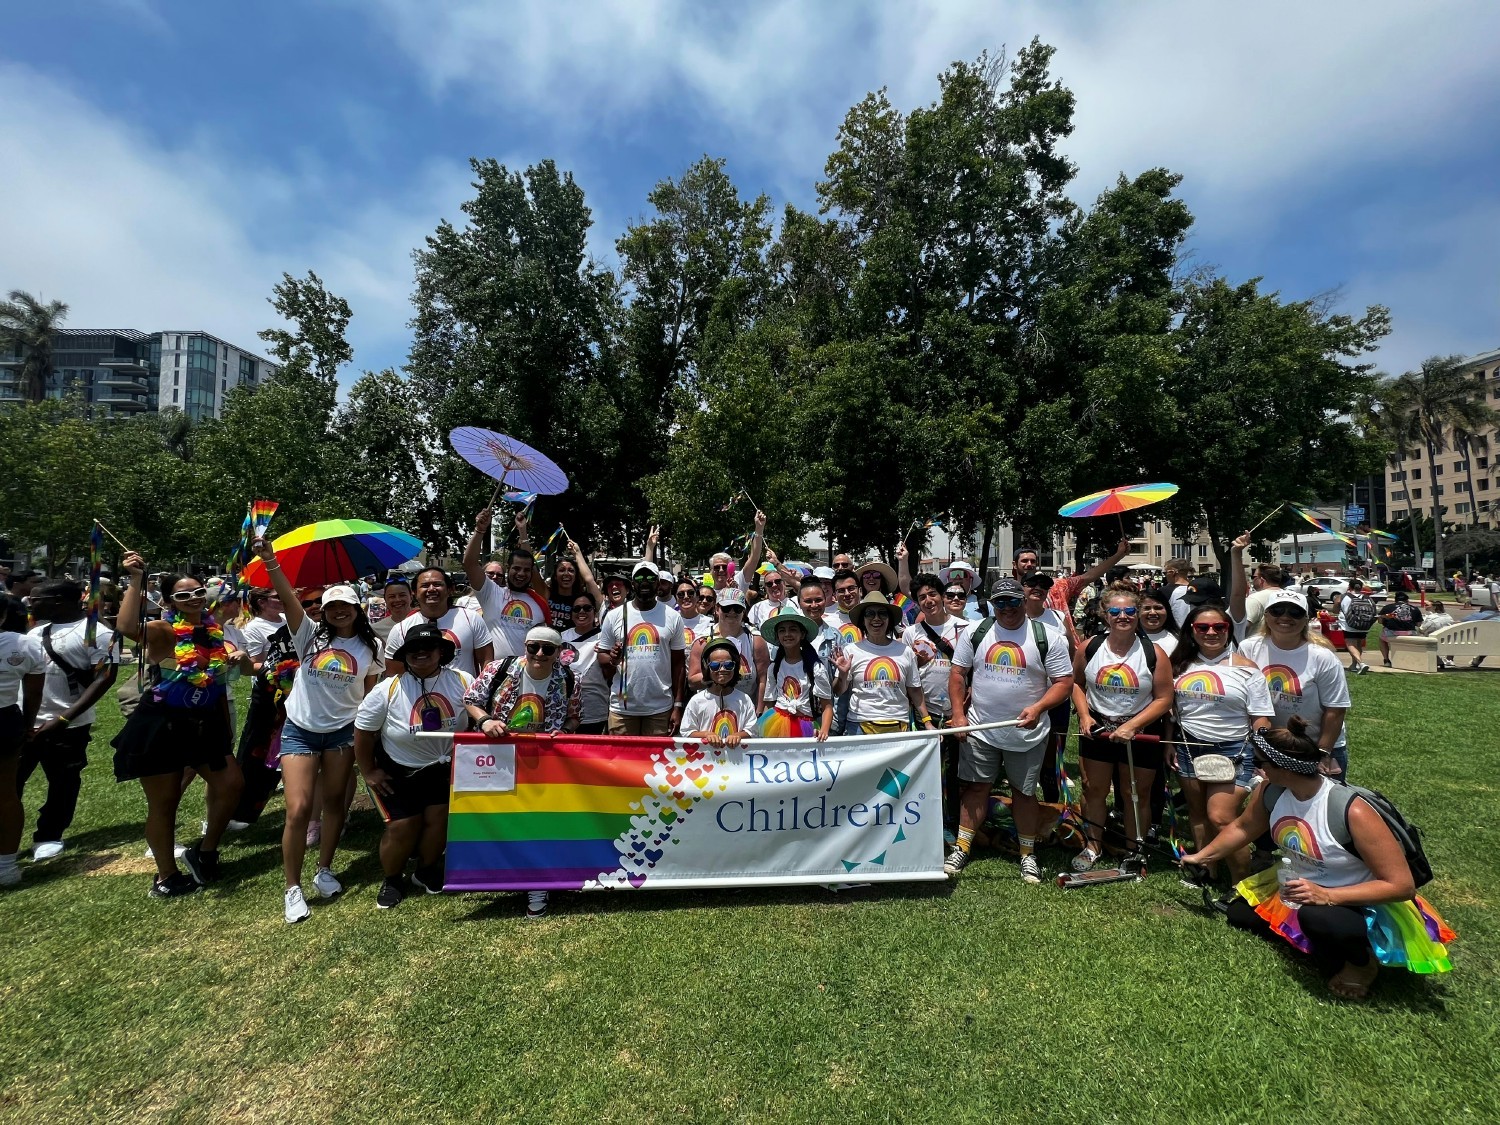 Rady children's team members at the San Diego Pride Parade.